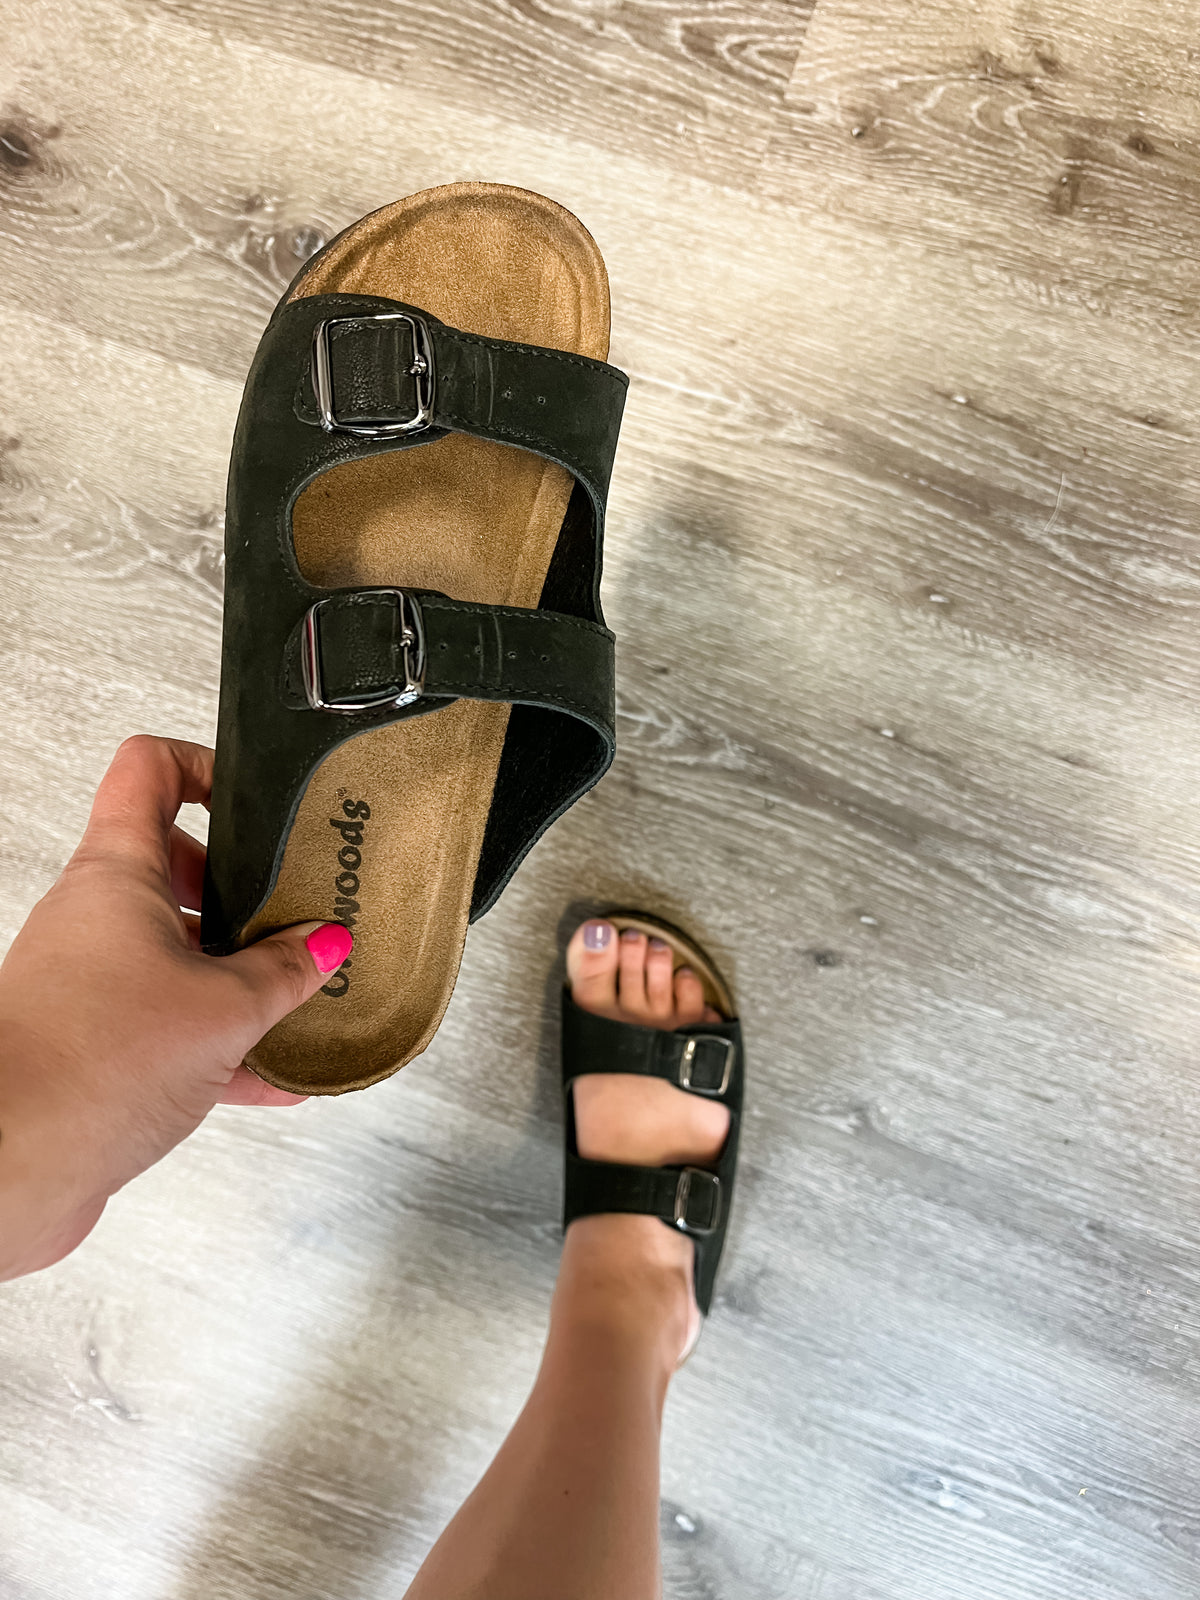 Faux Suede Double Buckle Inspired Sandals (Black)